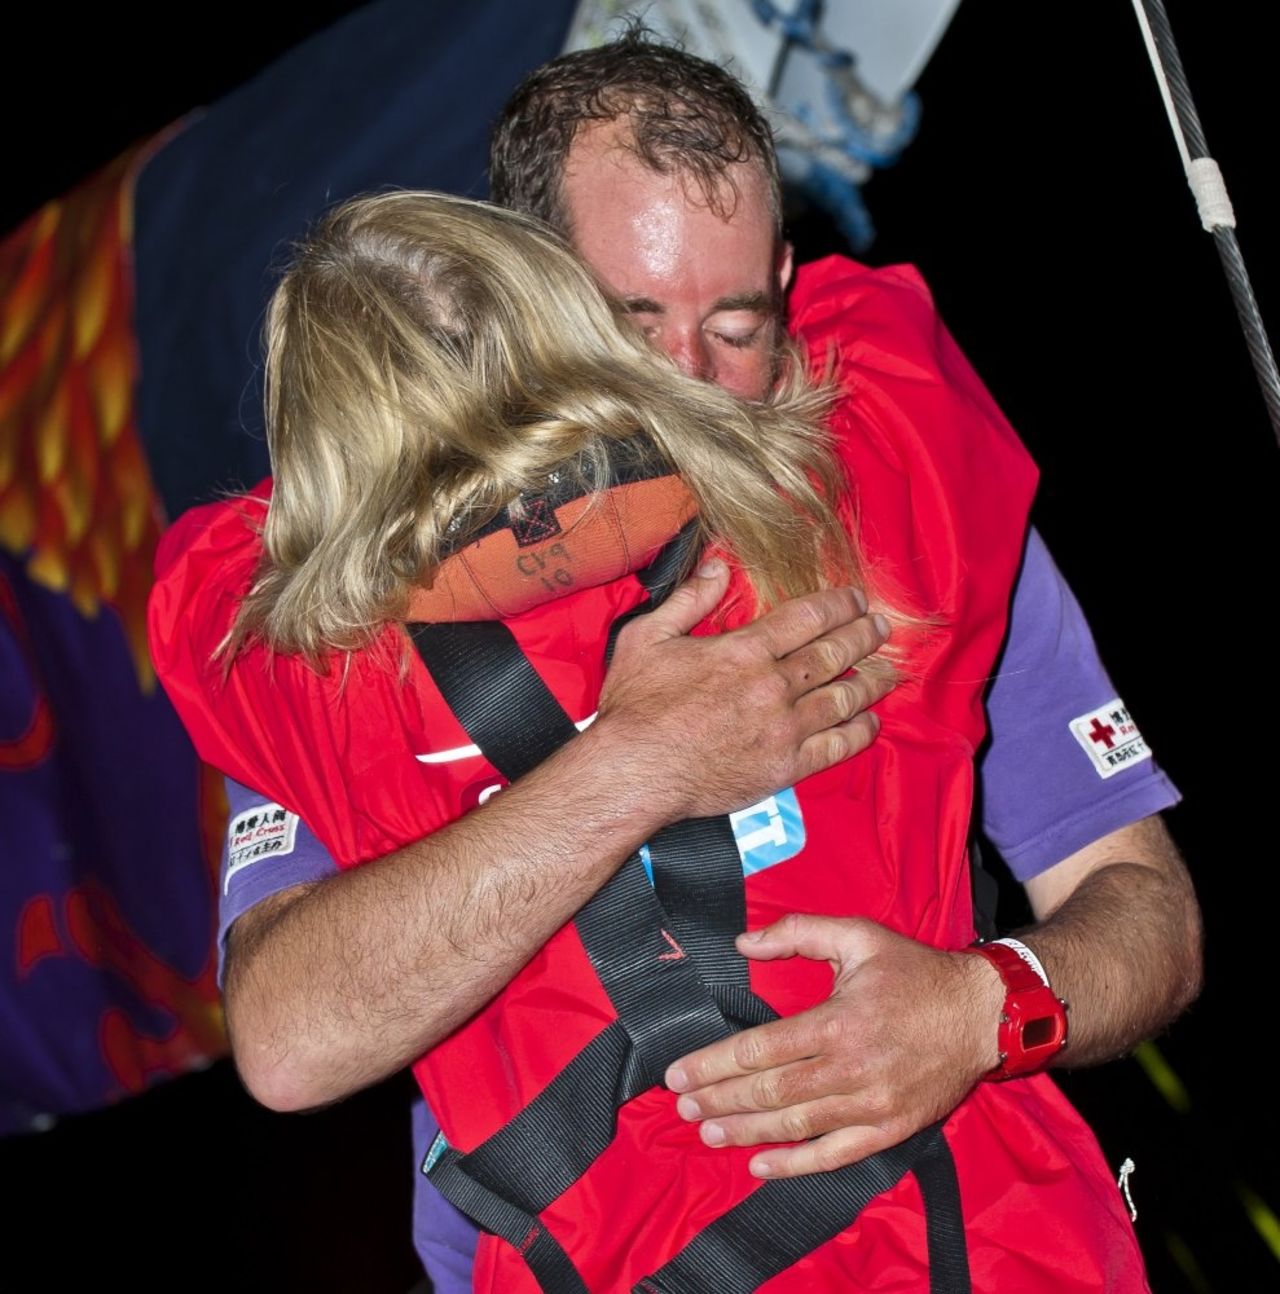 Qingdao crew members, David Hall and Joanna Sandford, embrace after arriving in Western Australia. "You learn a lot about the people on board -- it's human interaction on a really deep level," said sailor Lisa Blair.